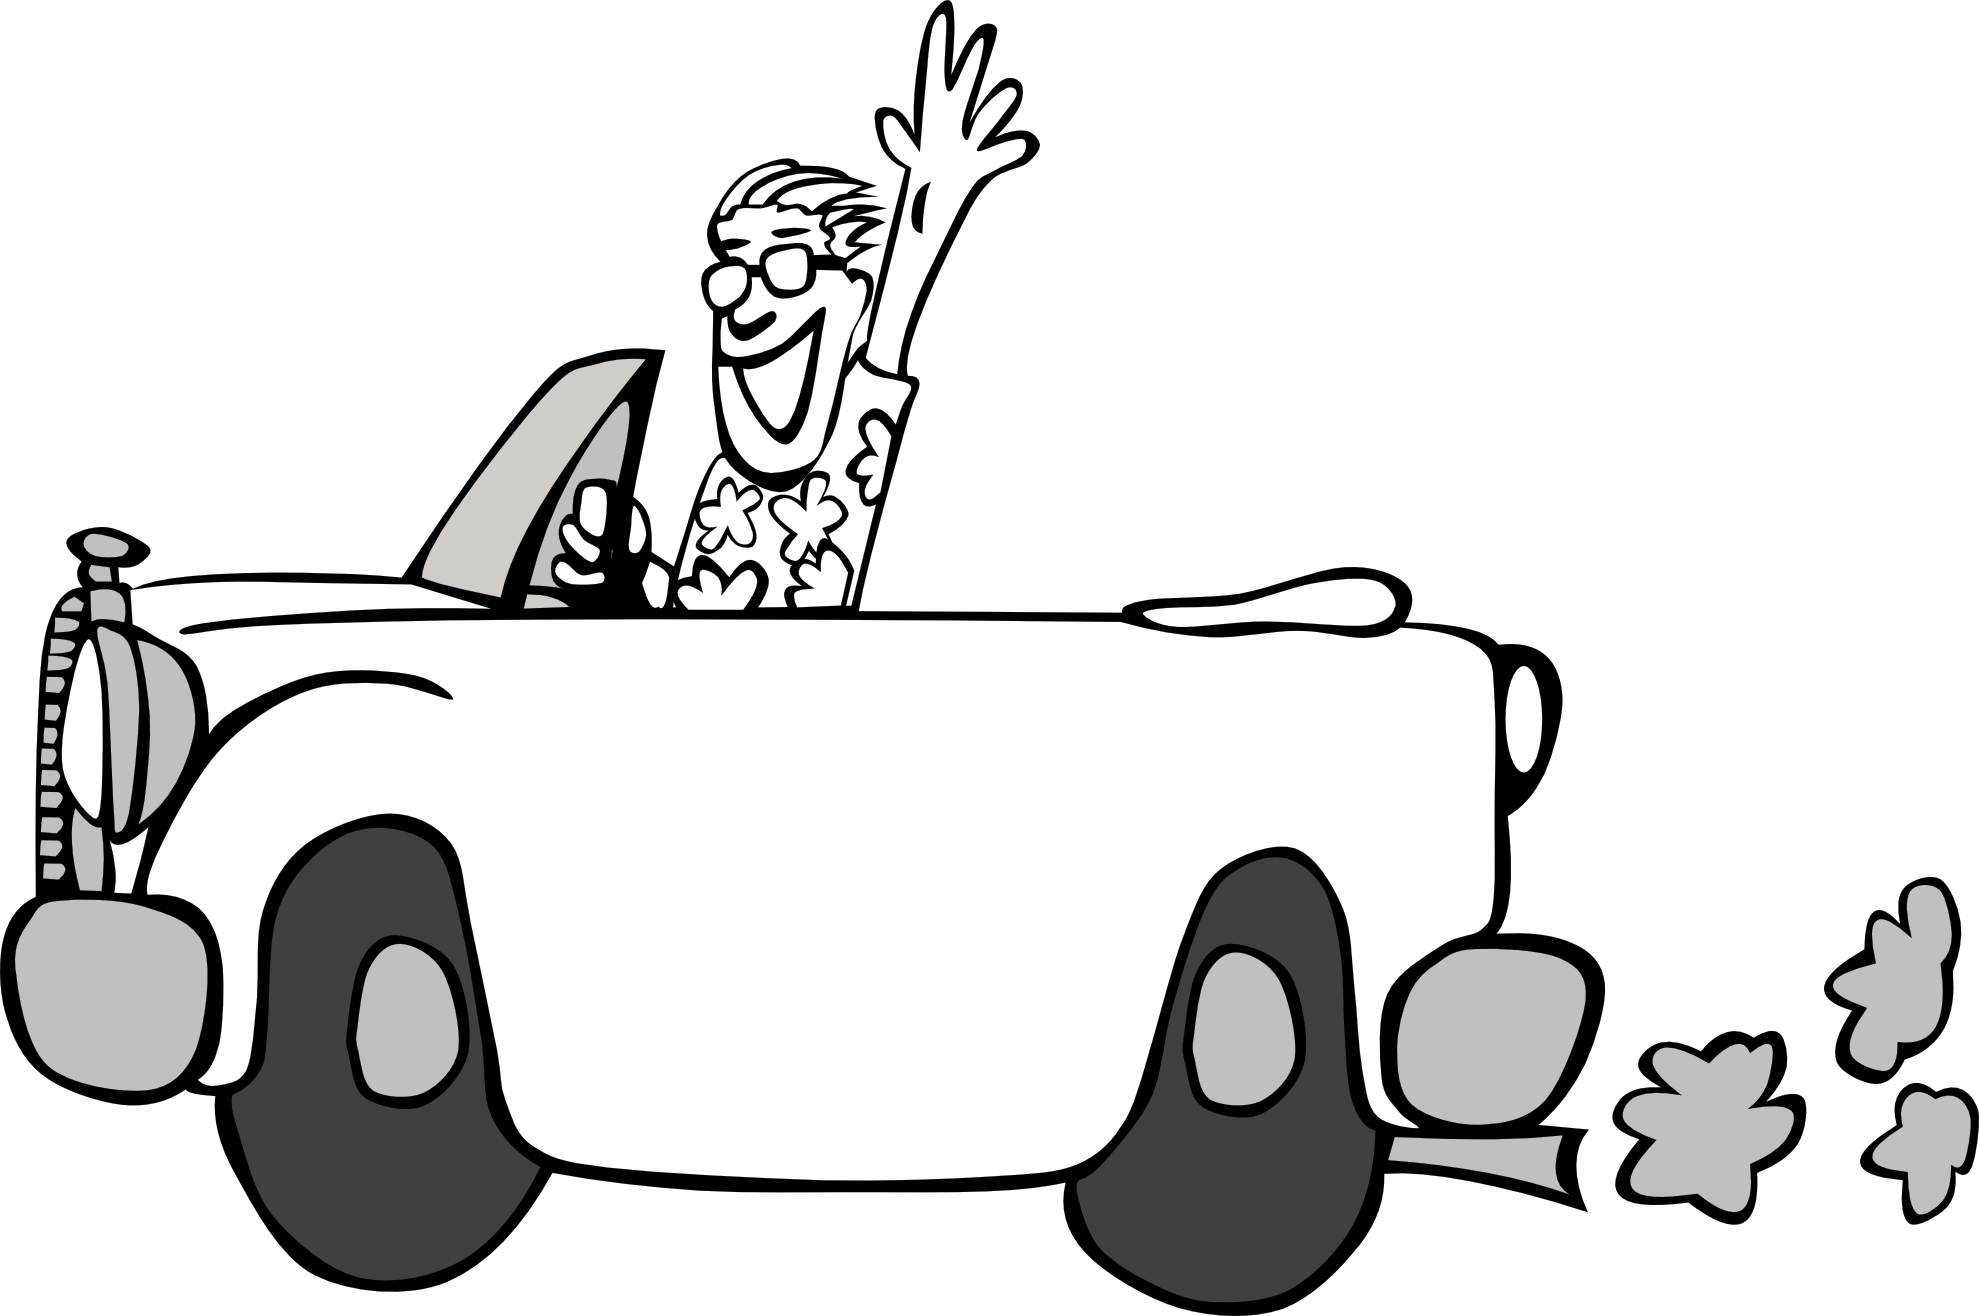 free car wash clipart black and white - photo #33